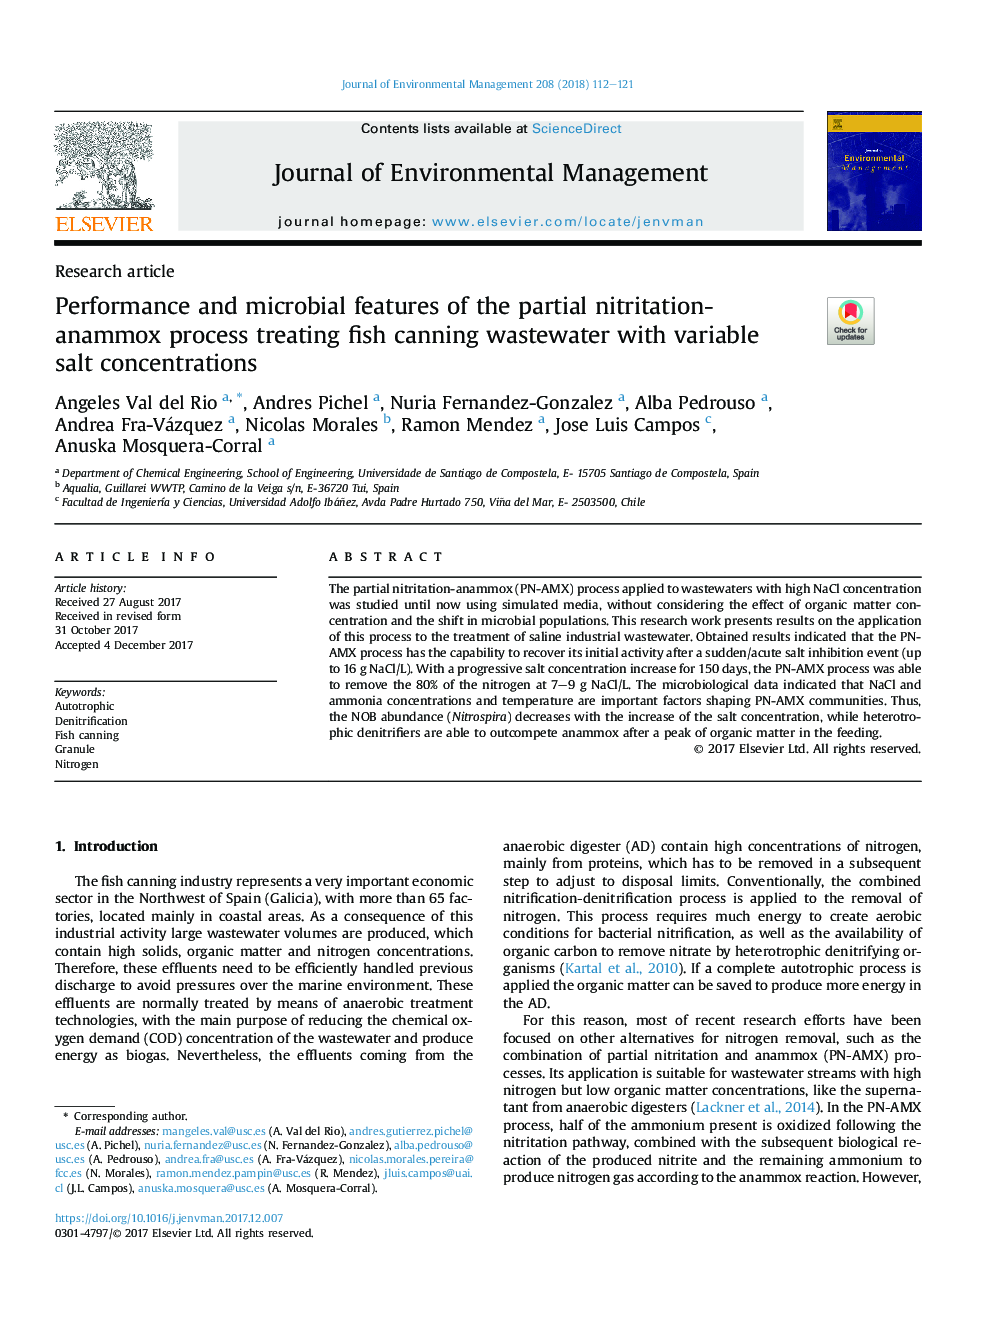 Performance and microbial features of the partial nitritation-anammox process treating fish canning wastewater with variable saltÂ concentrations